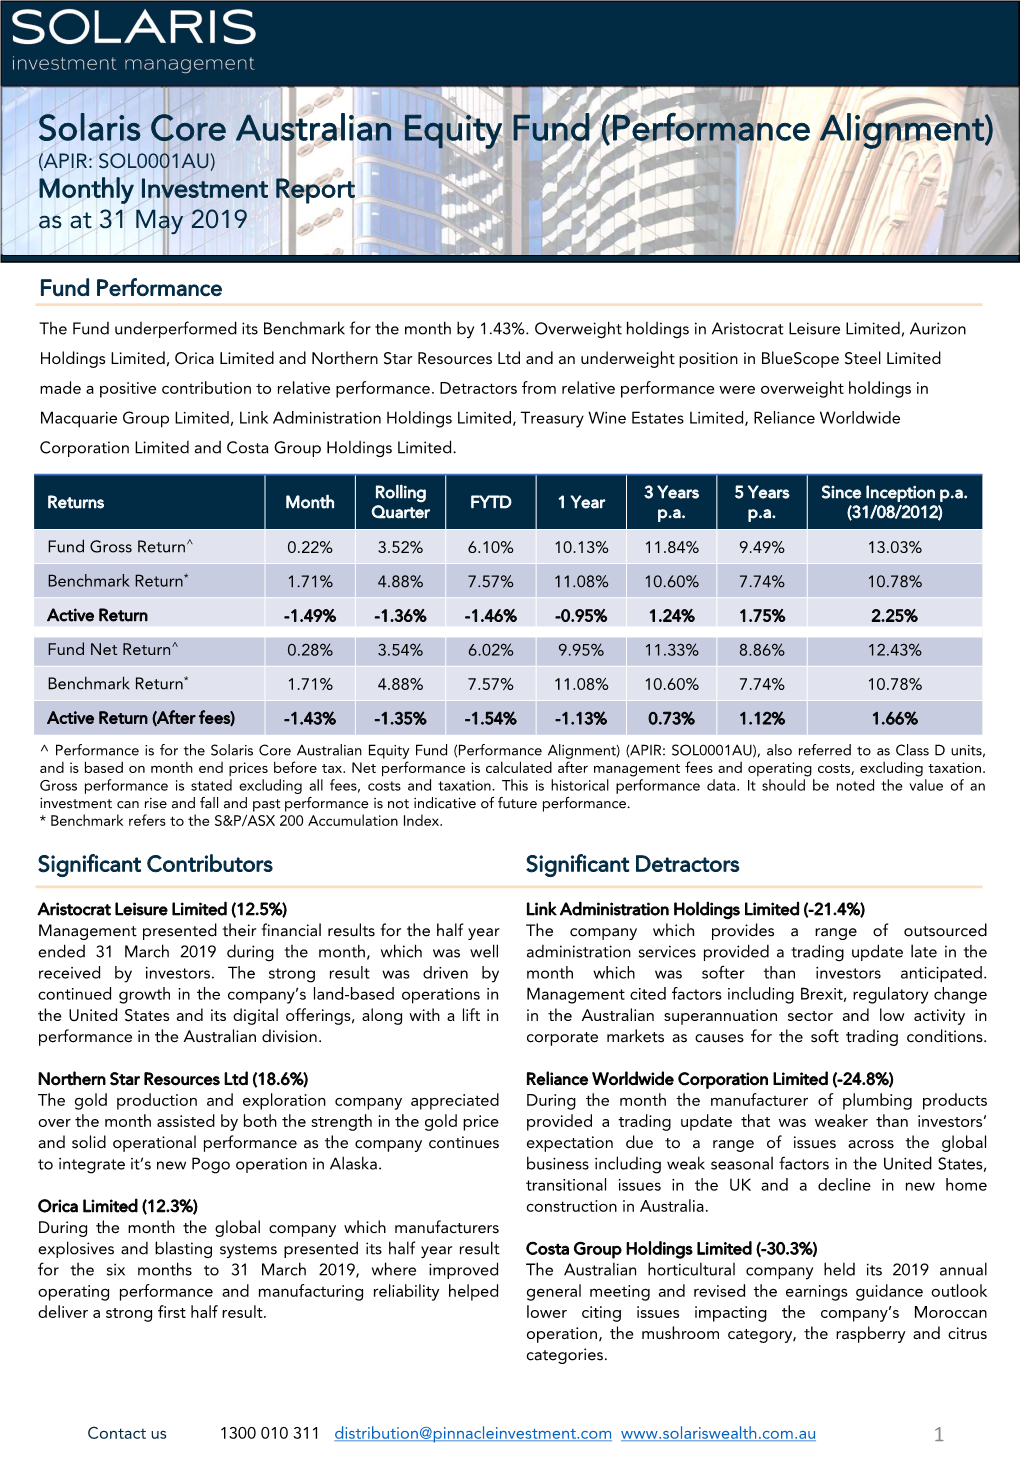 Solaris Core Australian Equity Fund (Performance Alignment) (APIR: SOL0001AU) Monthly Investment Report As at 31 May 2019